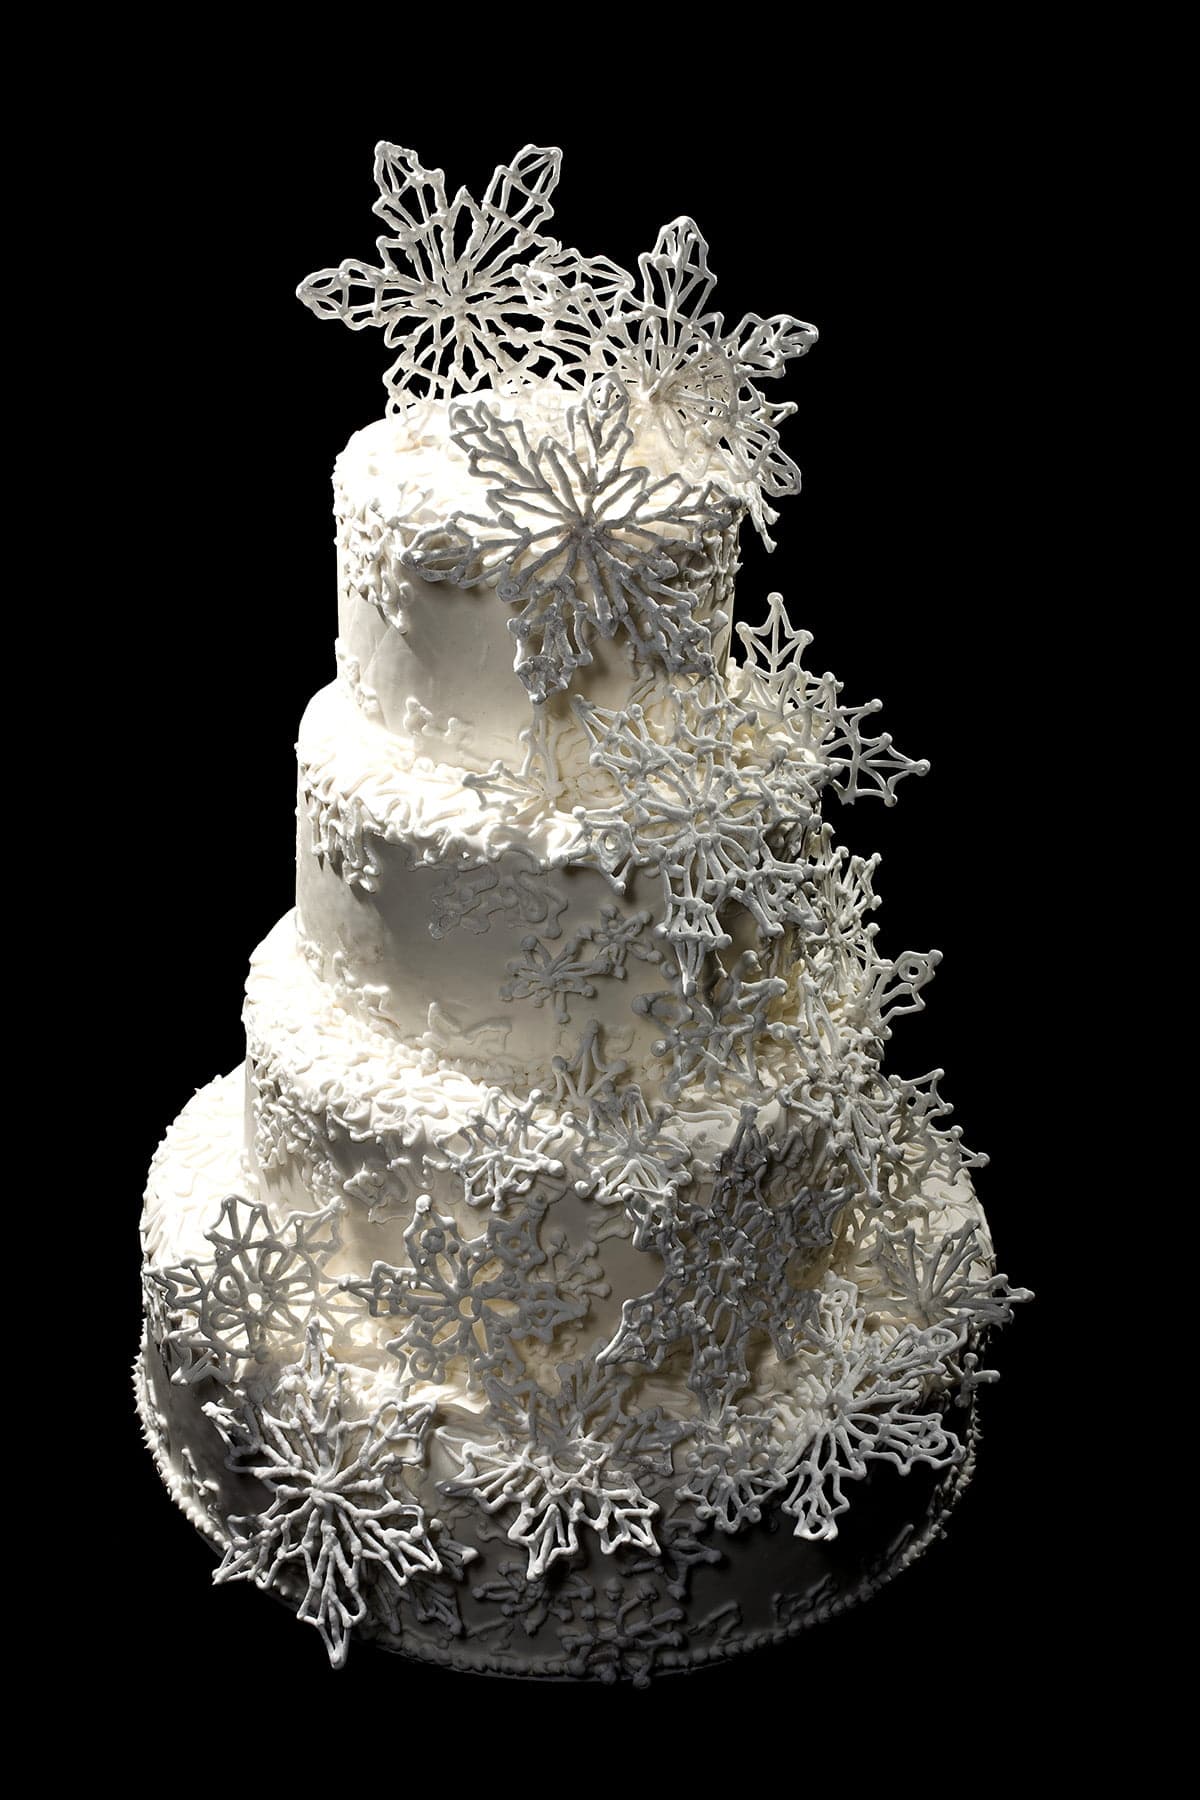 Detail photo of a 4 tier white wedding cake, piped with an intricate lace design, and adorned with a cascade of 3D piped snowflakes.